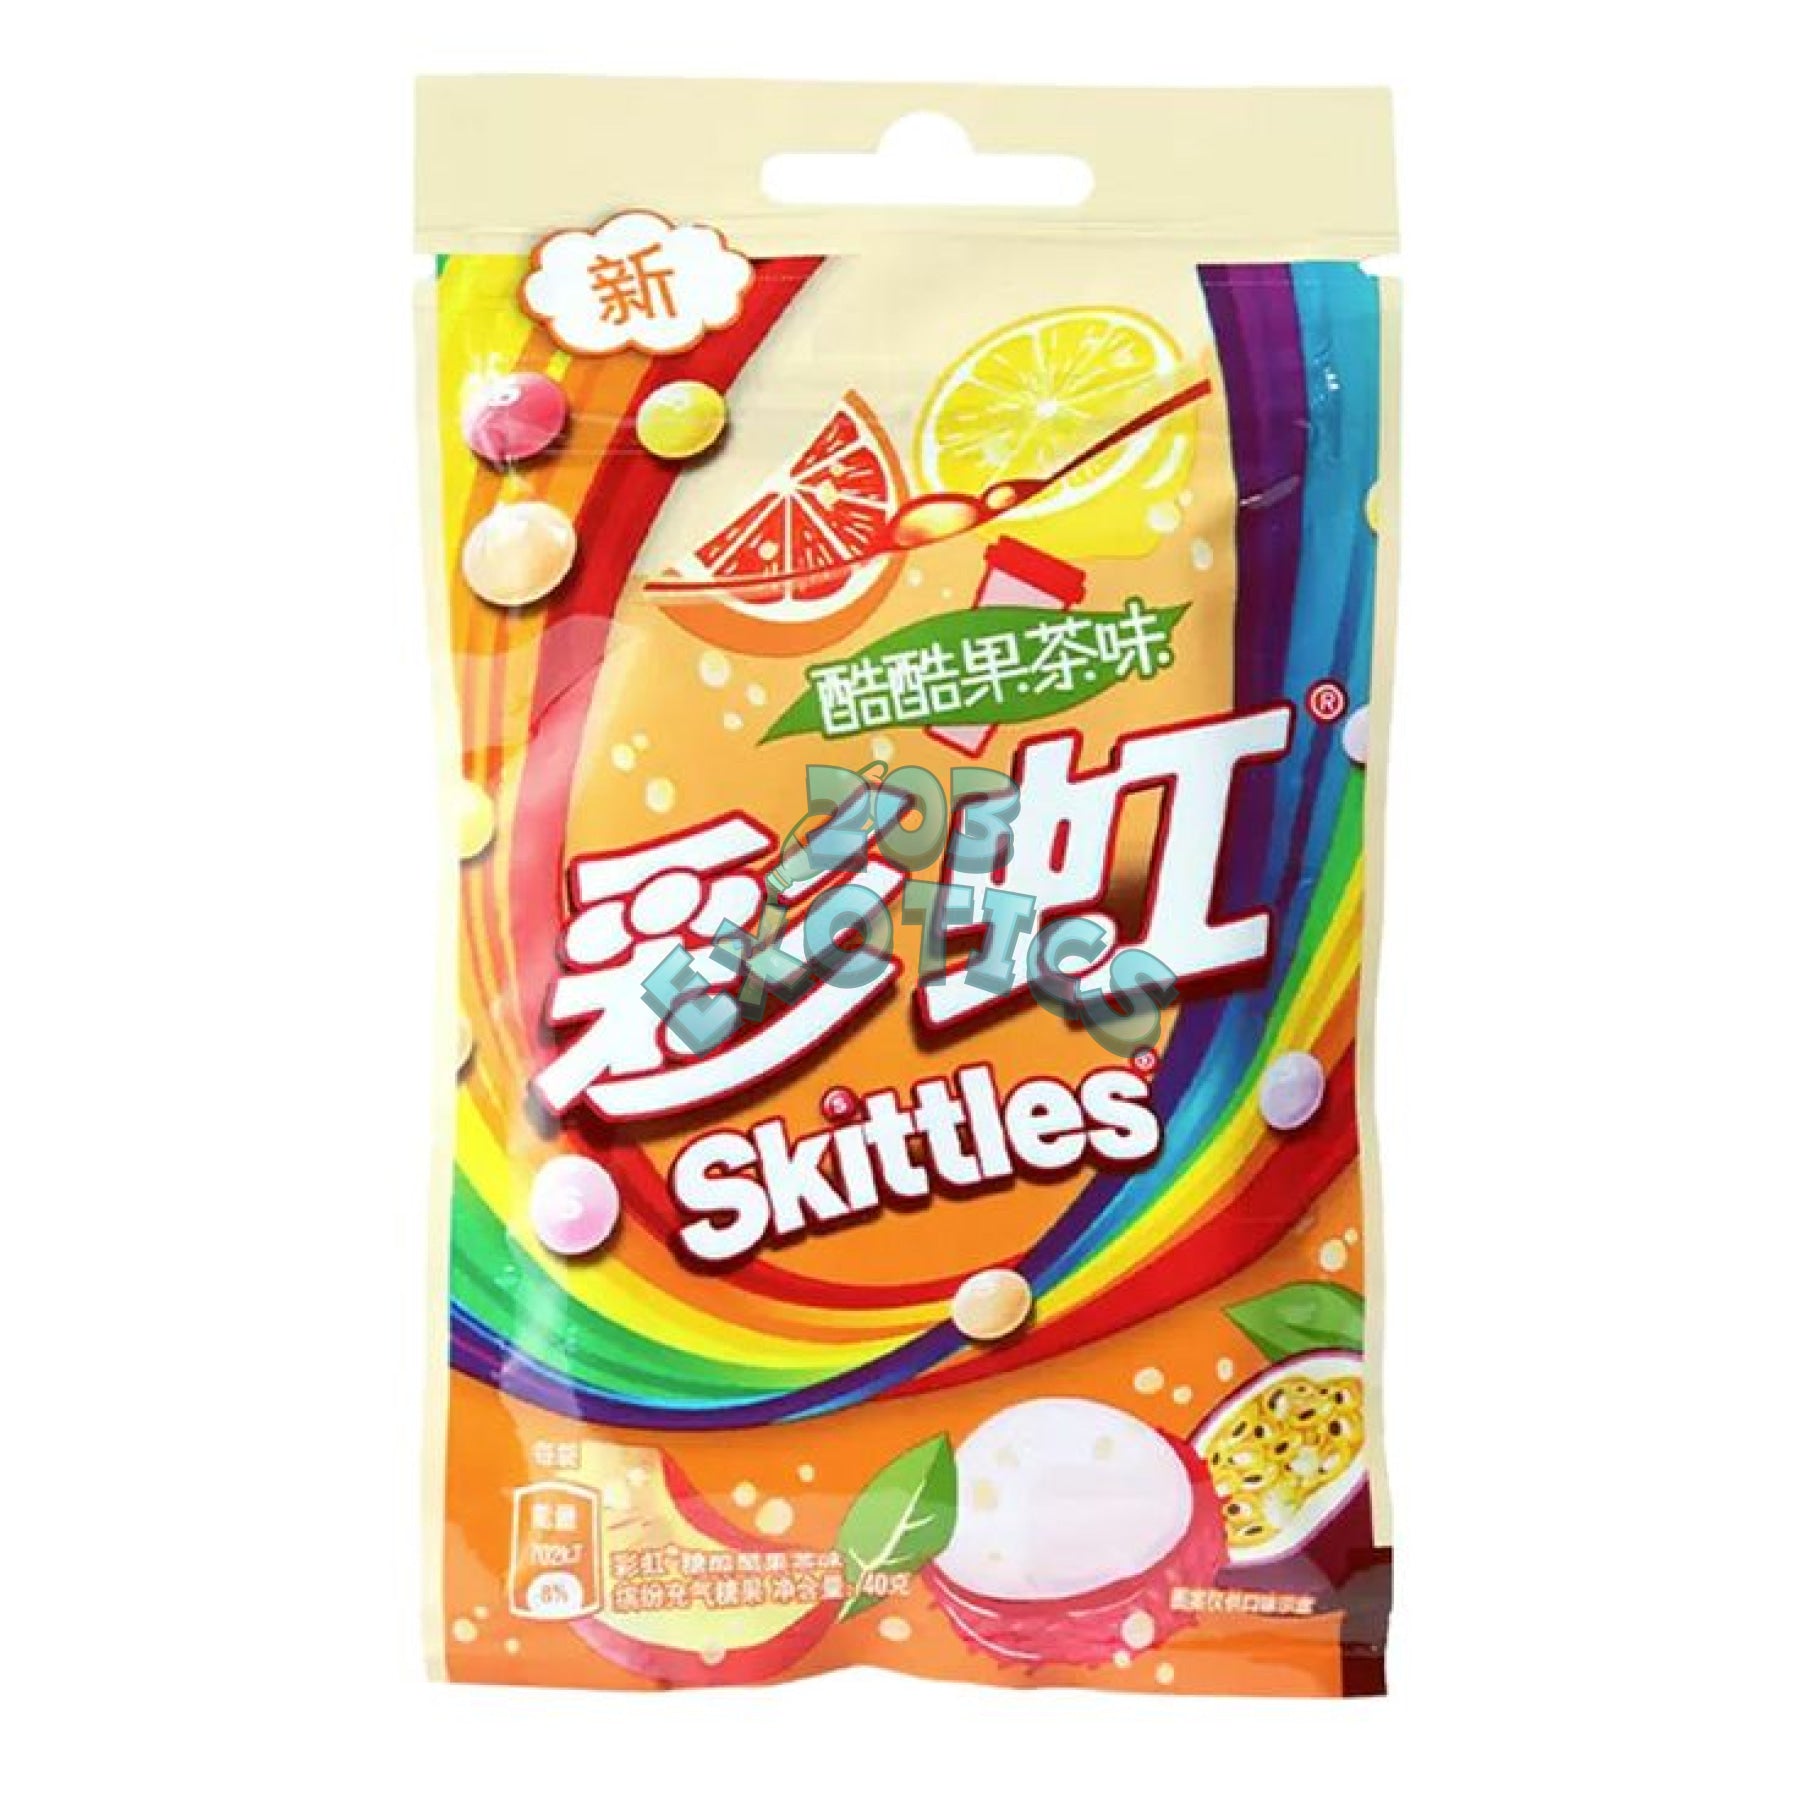 Skittles Bags From China Tea Candy